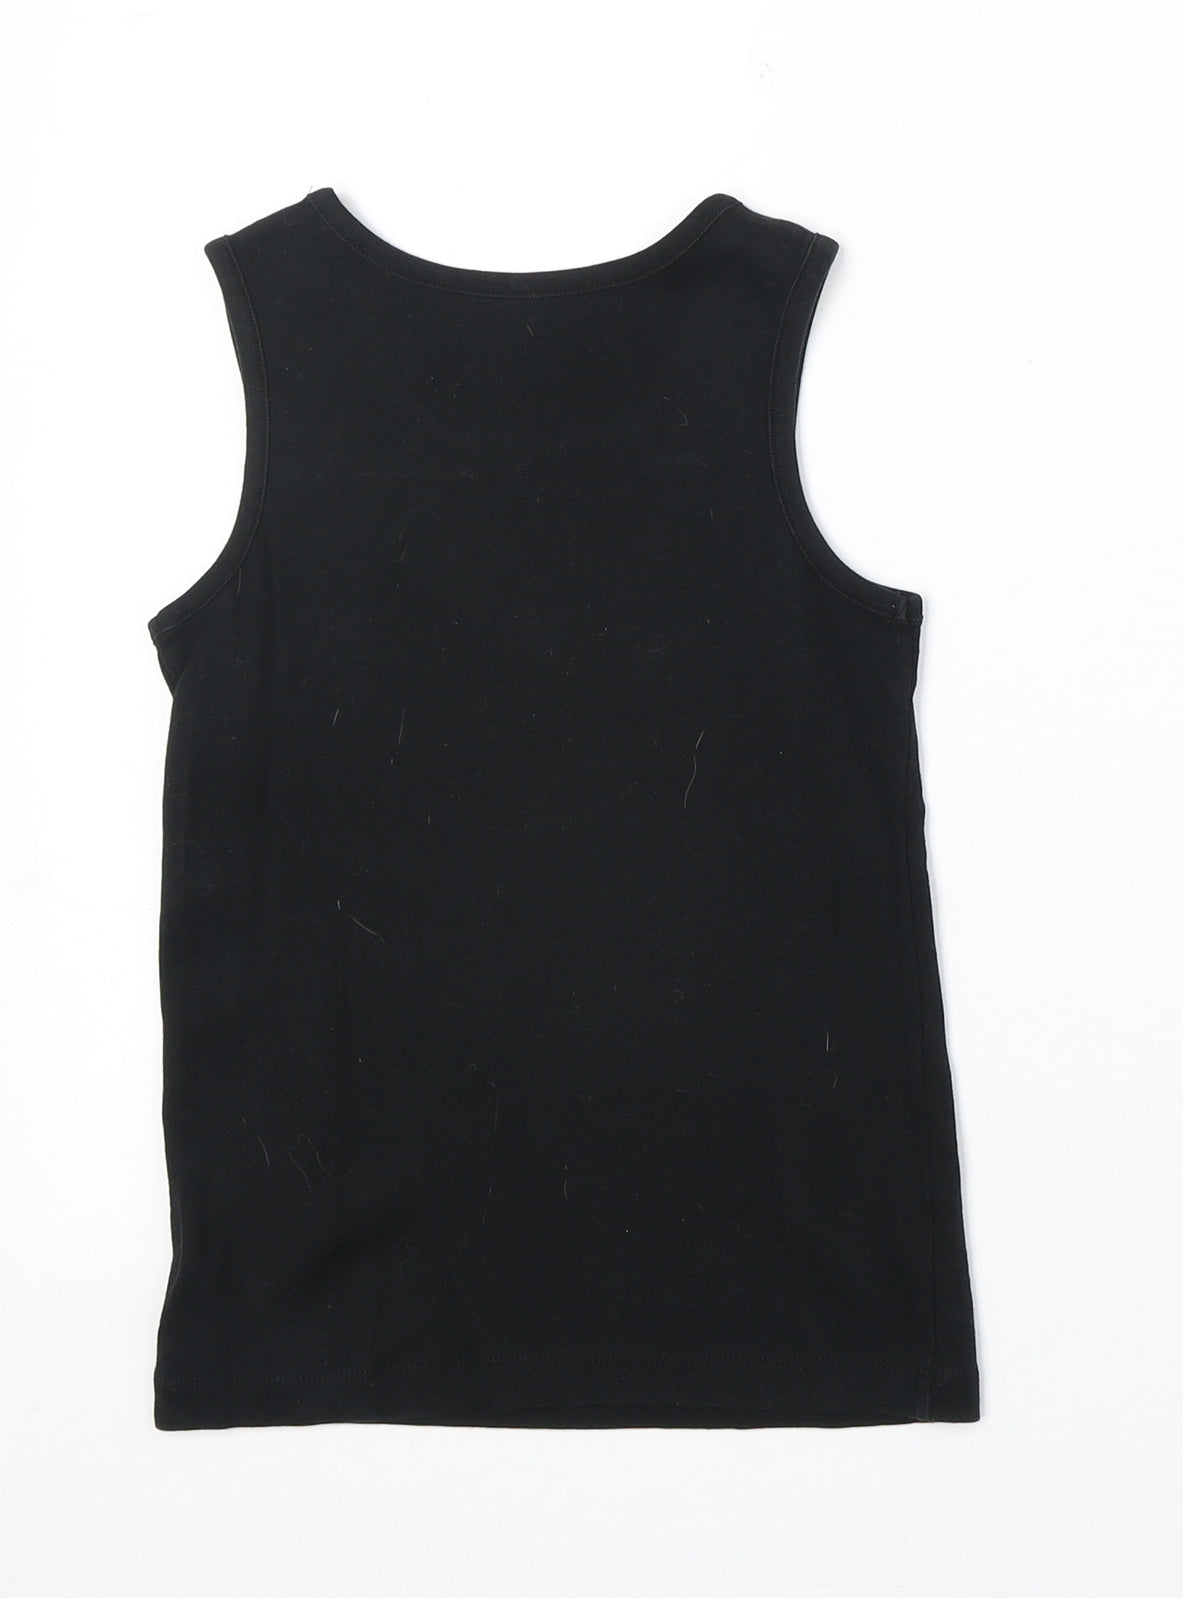 Marks and Spencer Girls Black 100% Cotton Basic Tank Size 7-8 Years Round Neck Pullover